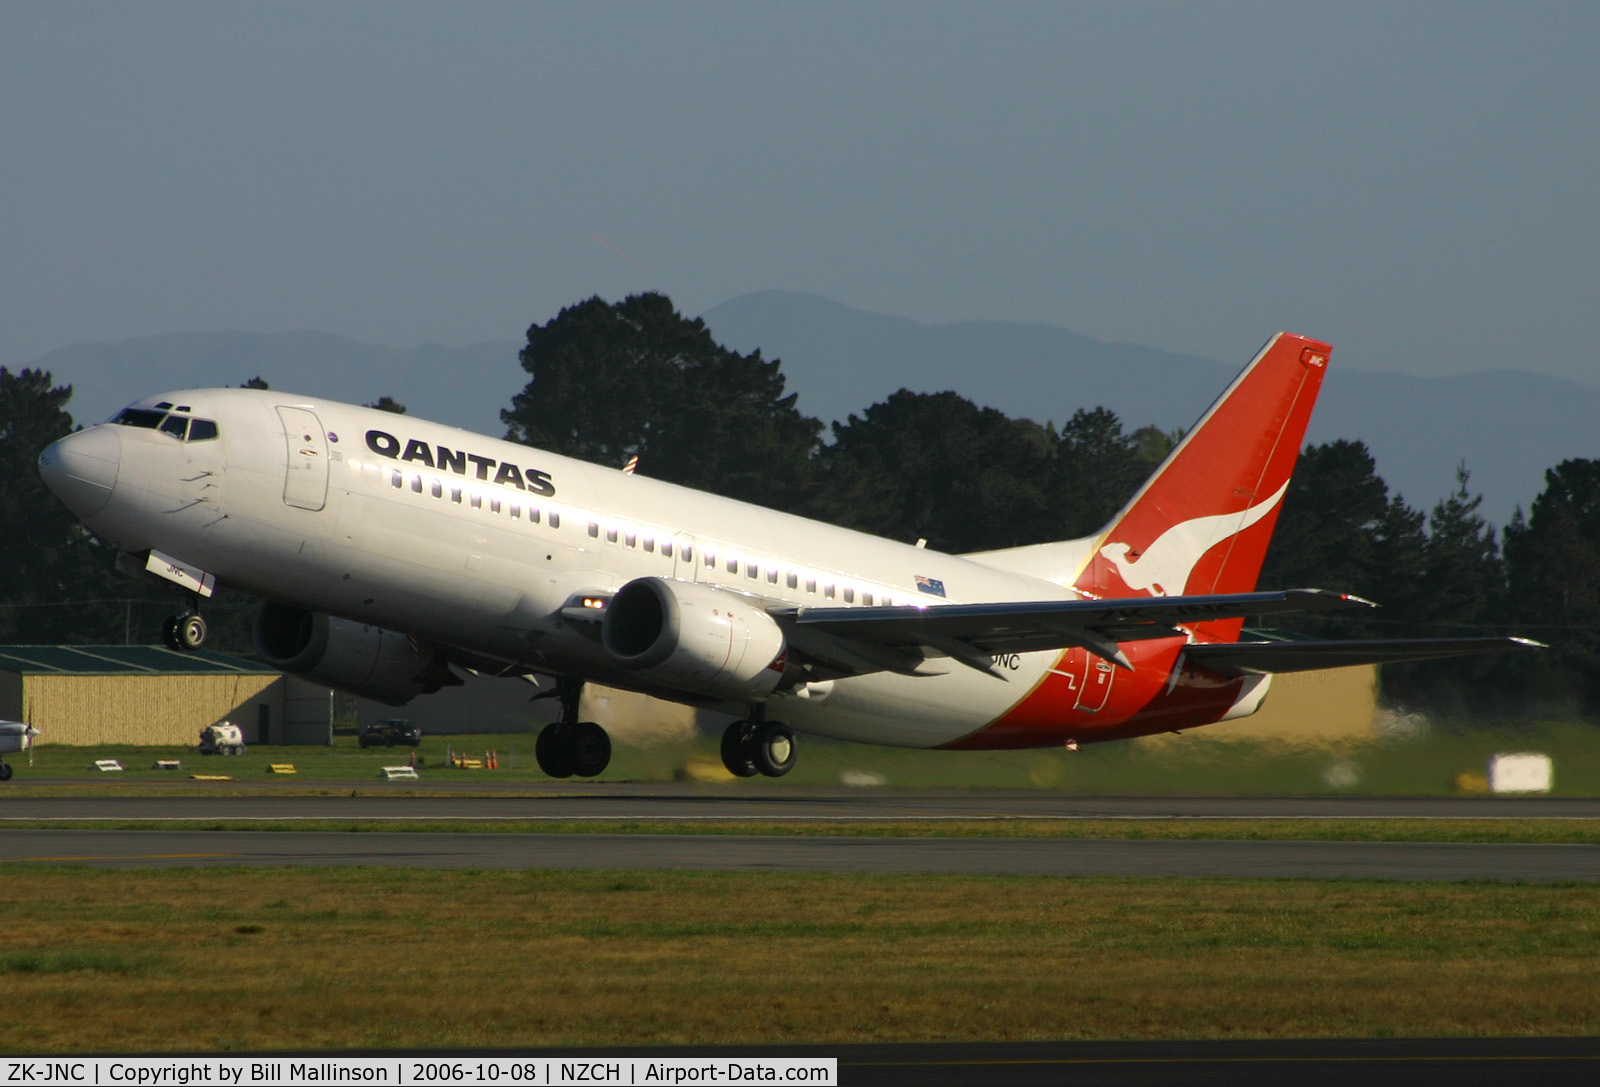 ZK-JNC, Boeing 737-376 C/N 24296, rotating from 20